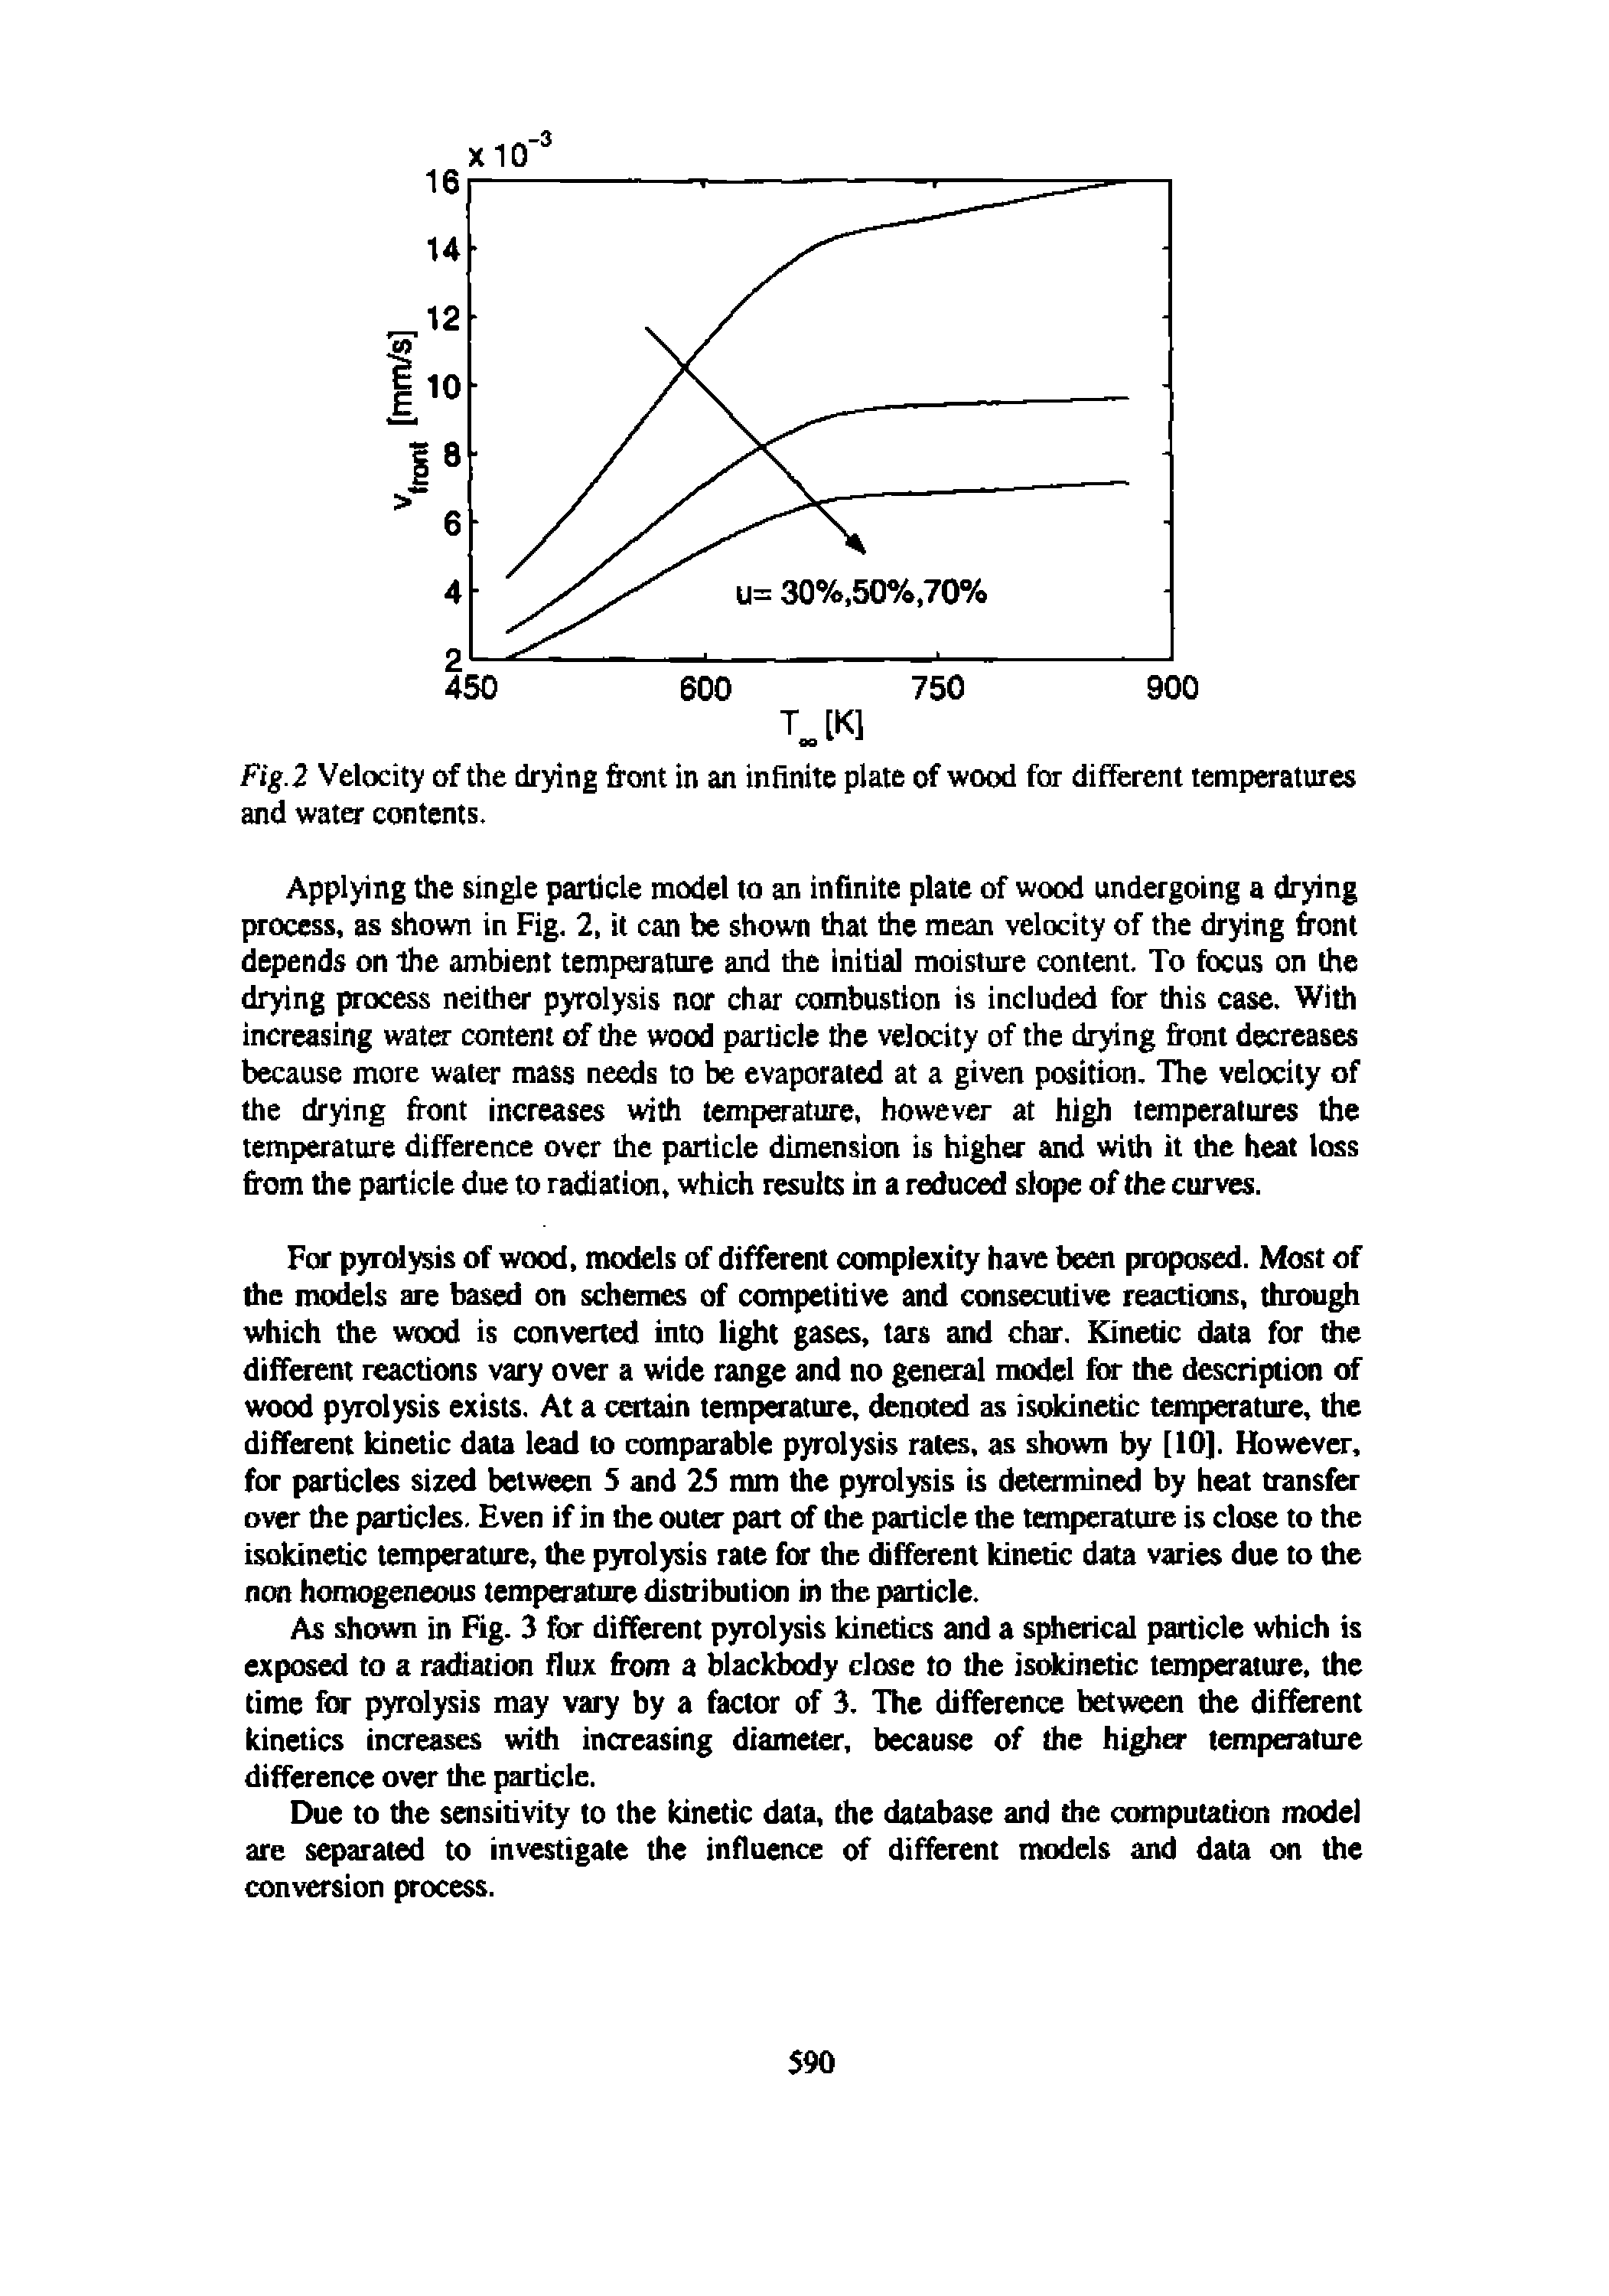 Fig. 2 Velocity of the drying front in an infinite plate of wood for different temperatures and watar contents.